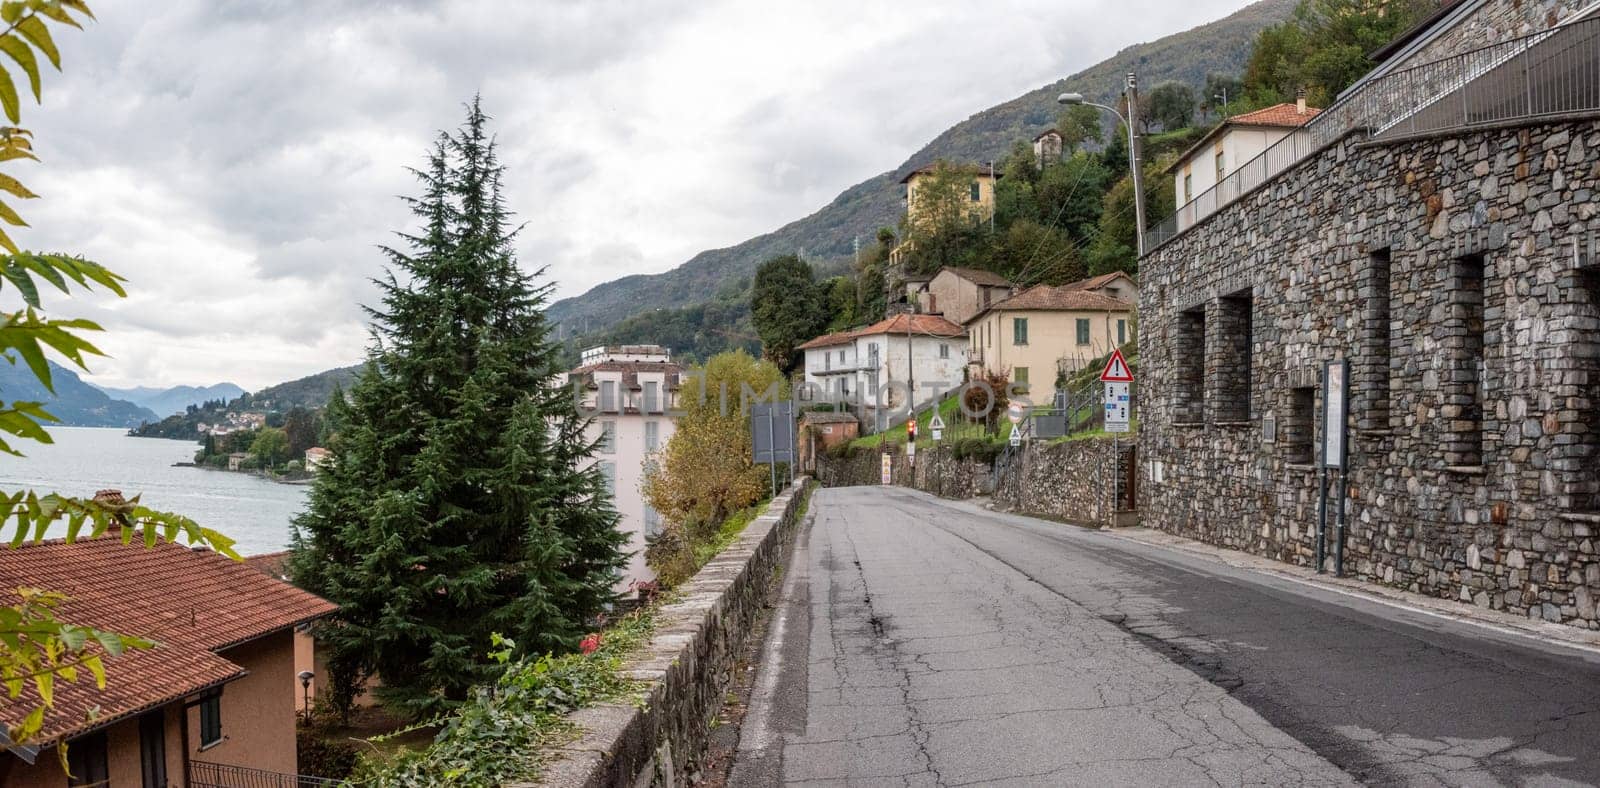 Street in village Musso-Dongo at lake Como, Italy, where the dictator Mussolini became imprisoned through a road blockade